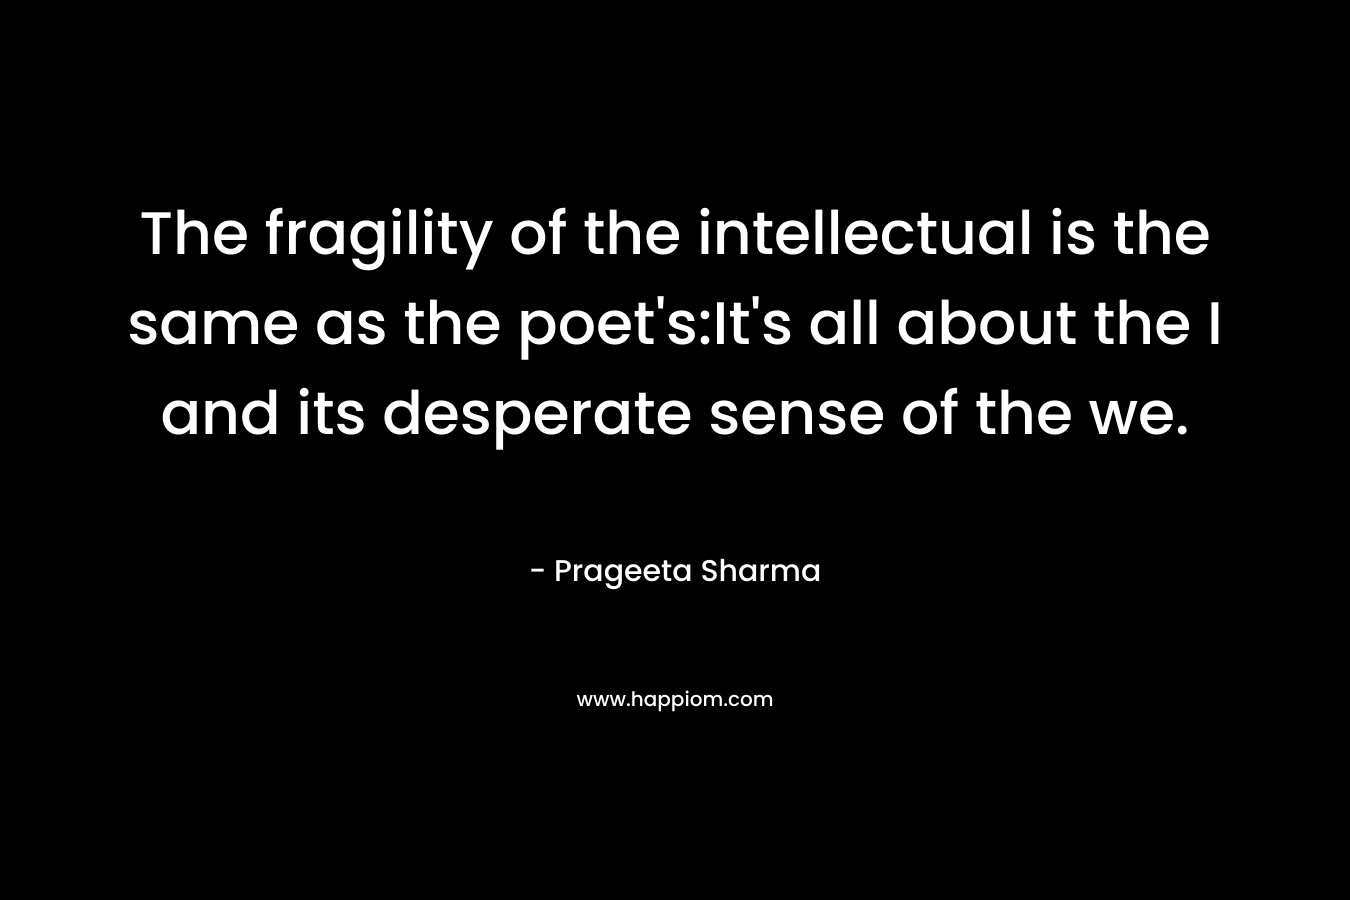 The fragility of the intellectual is the same as the poet's:It's all about the I and its desperate sense of the we.